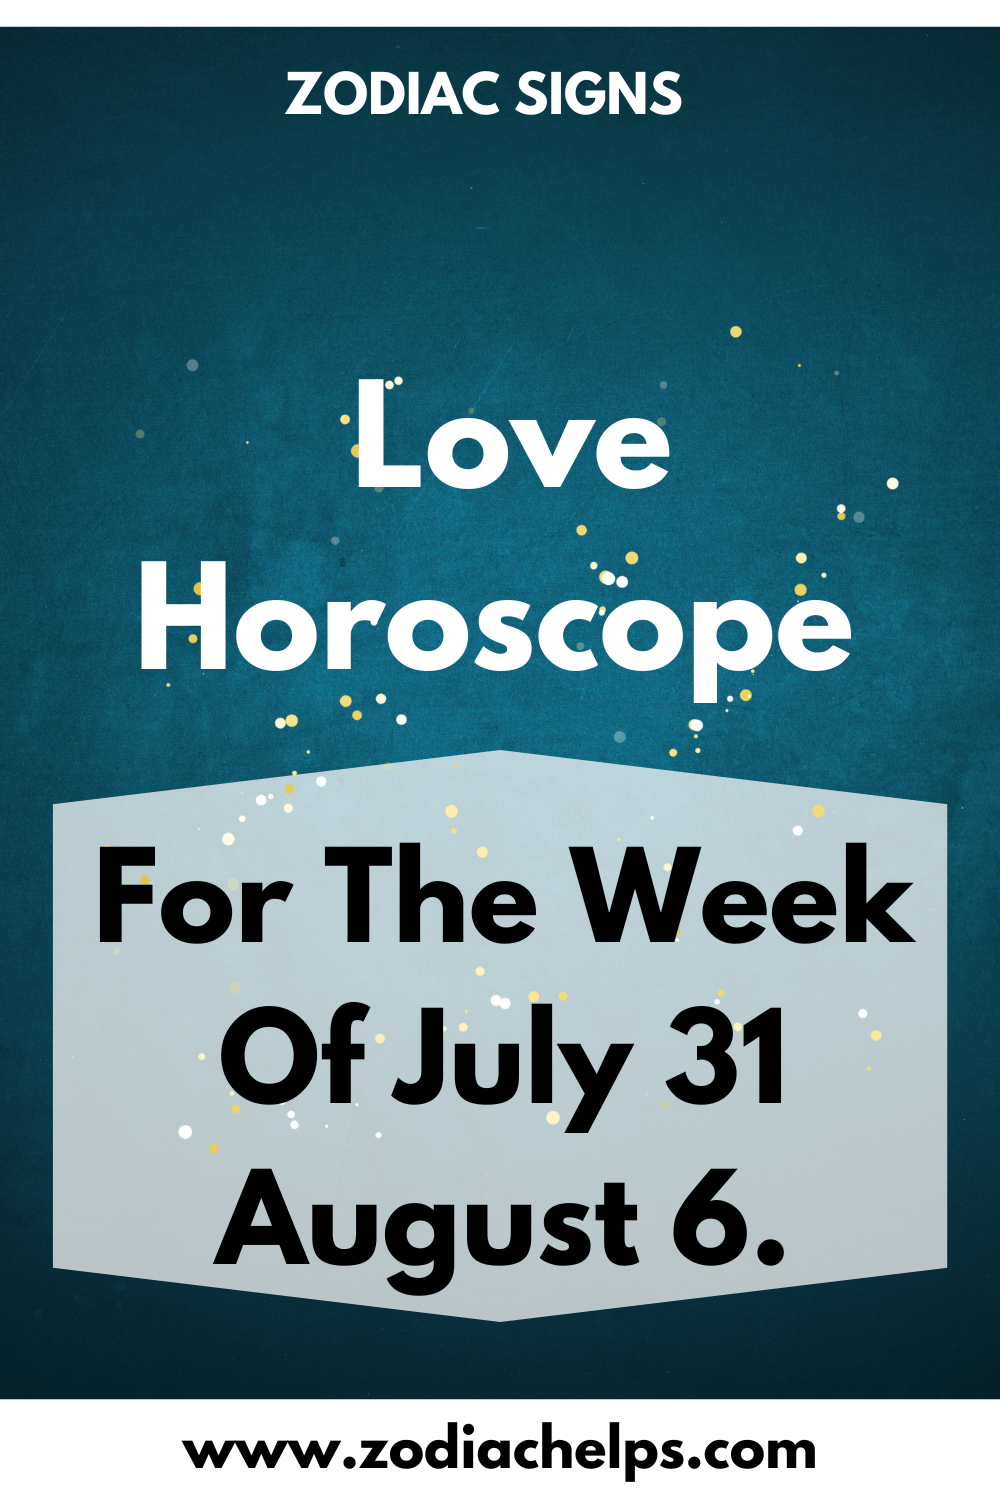 Love Horoscope For The Week Of July 31 August 6.